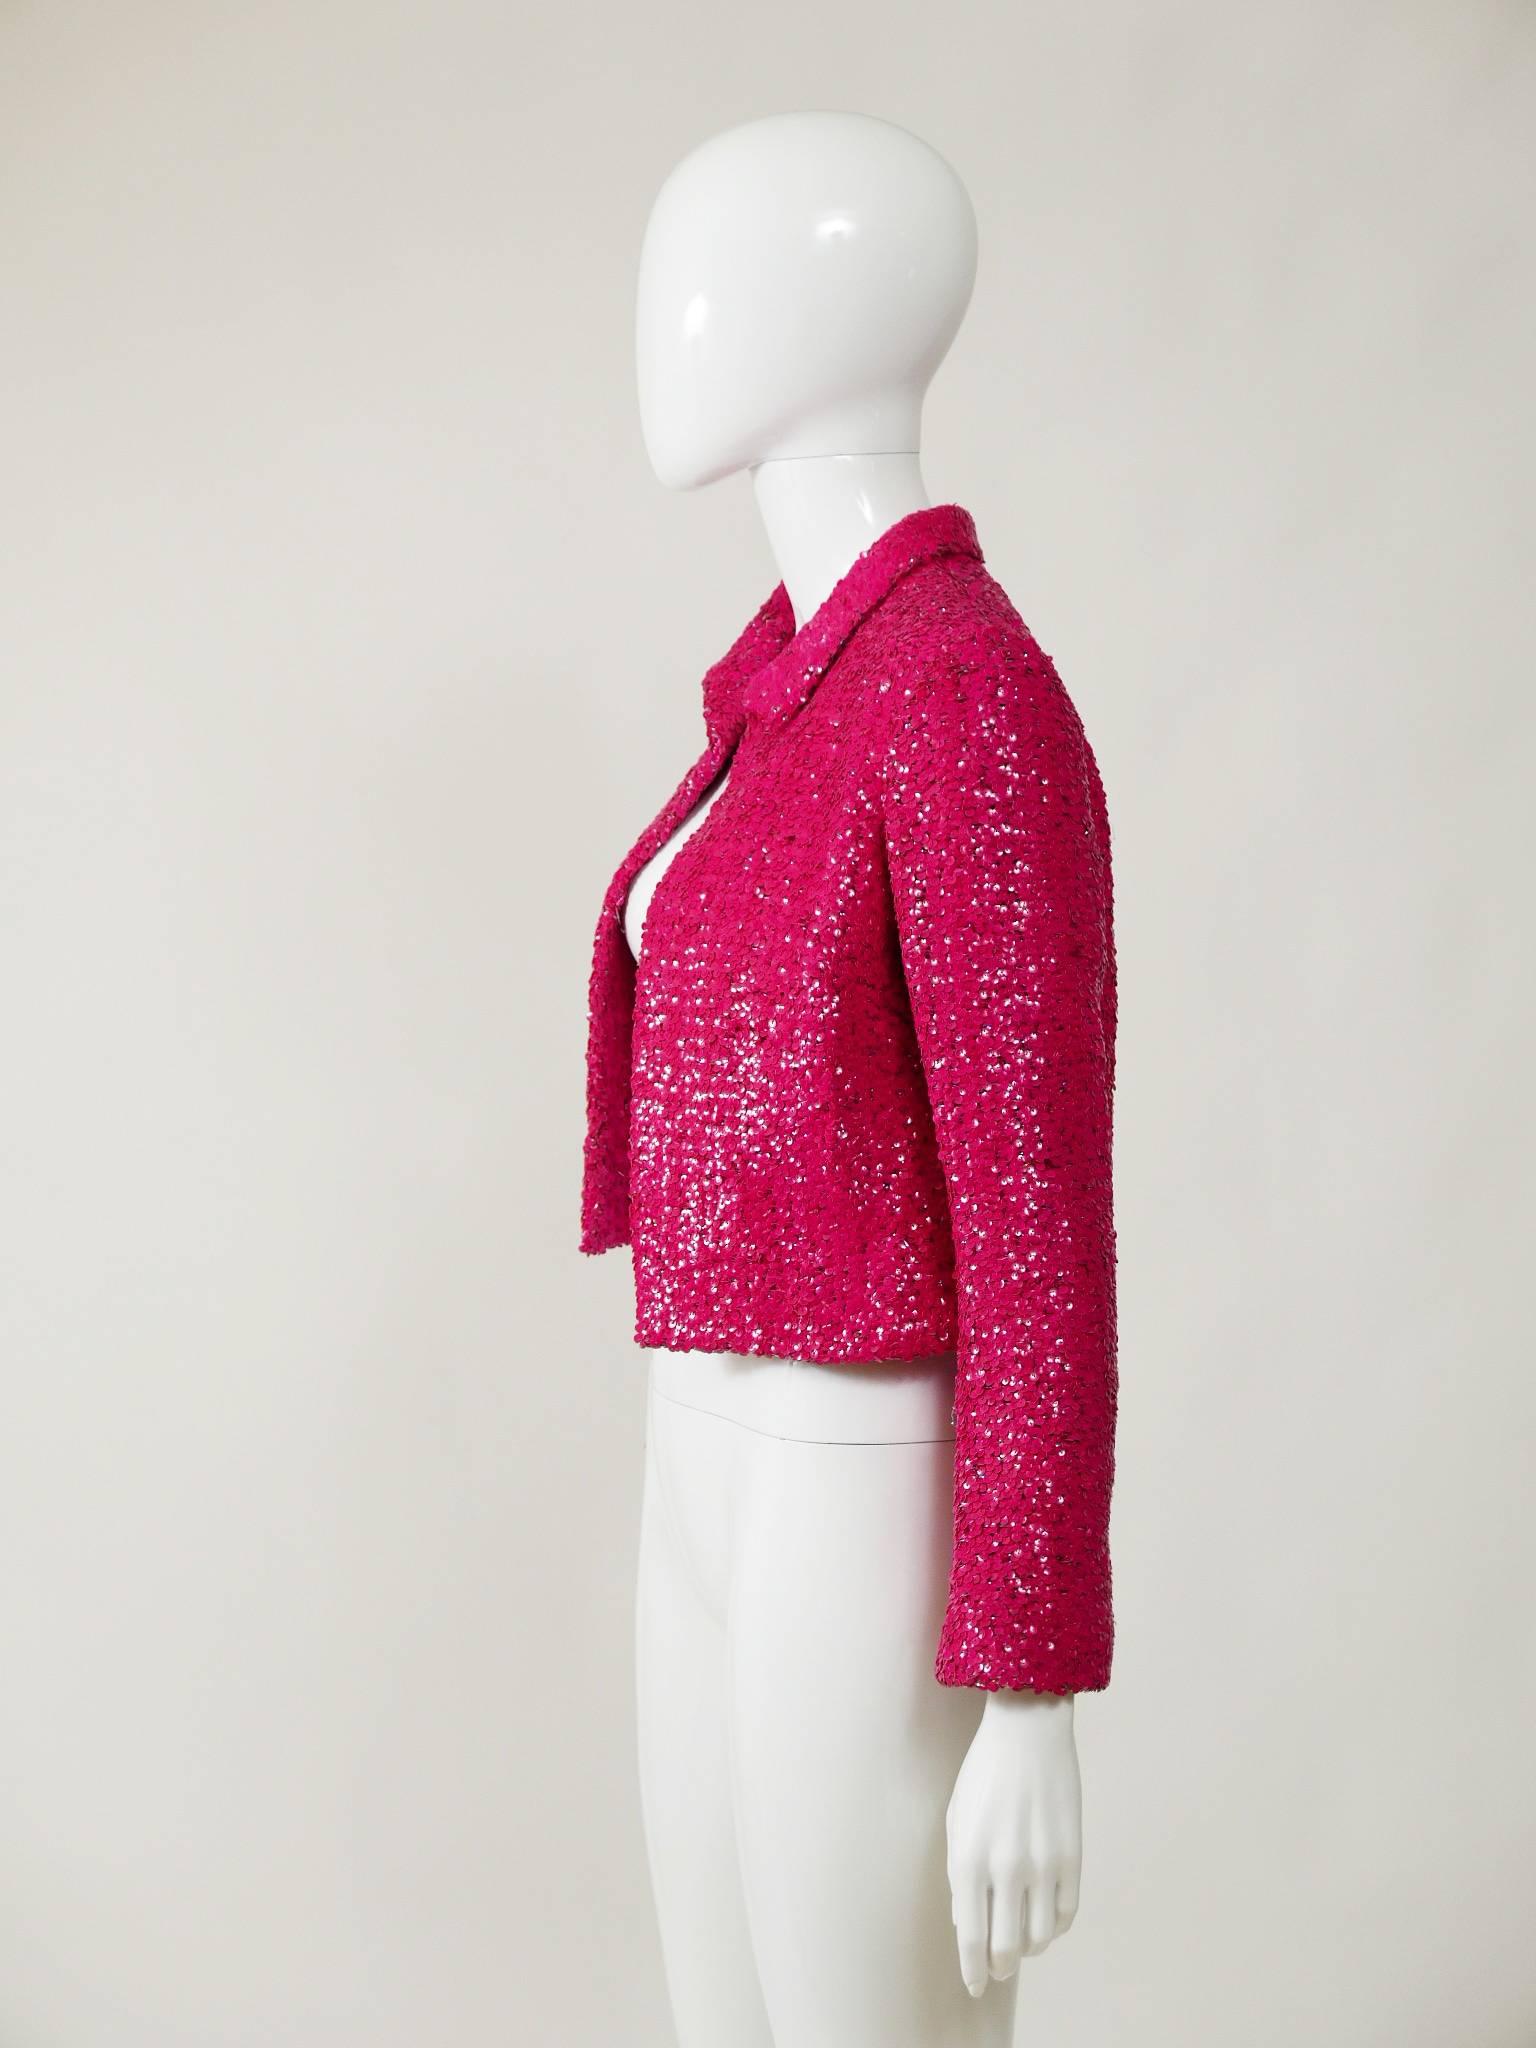 This stunning 1960s Curiel jacket is made with shocking pink sequins fabric. It has long sleeves and is fully satin lined.

Very good vintage condition

Label: Curiel
Fabric: silk
Color: shocking pink

Measurement:
Estimeted size